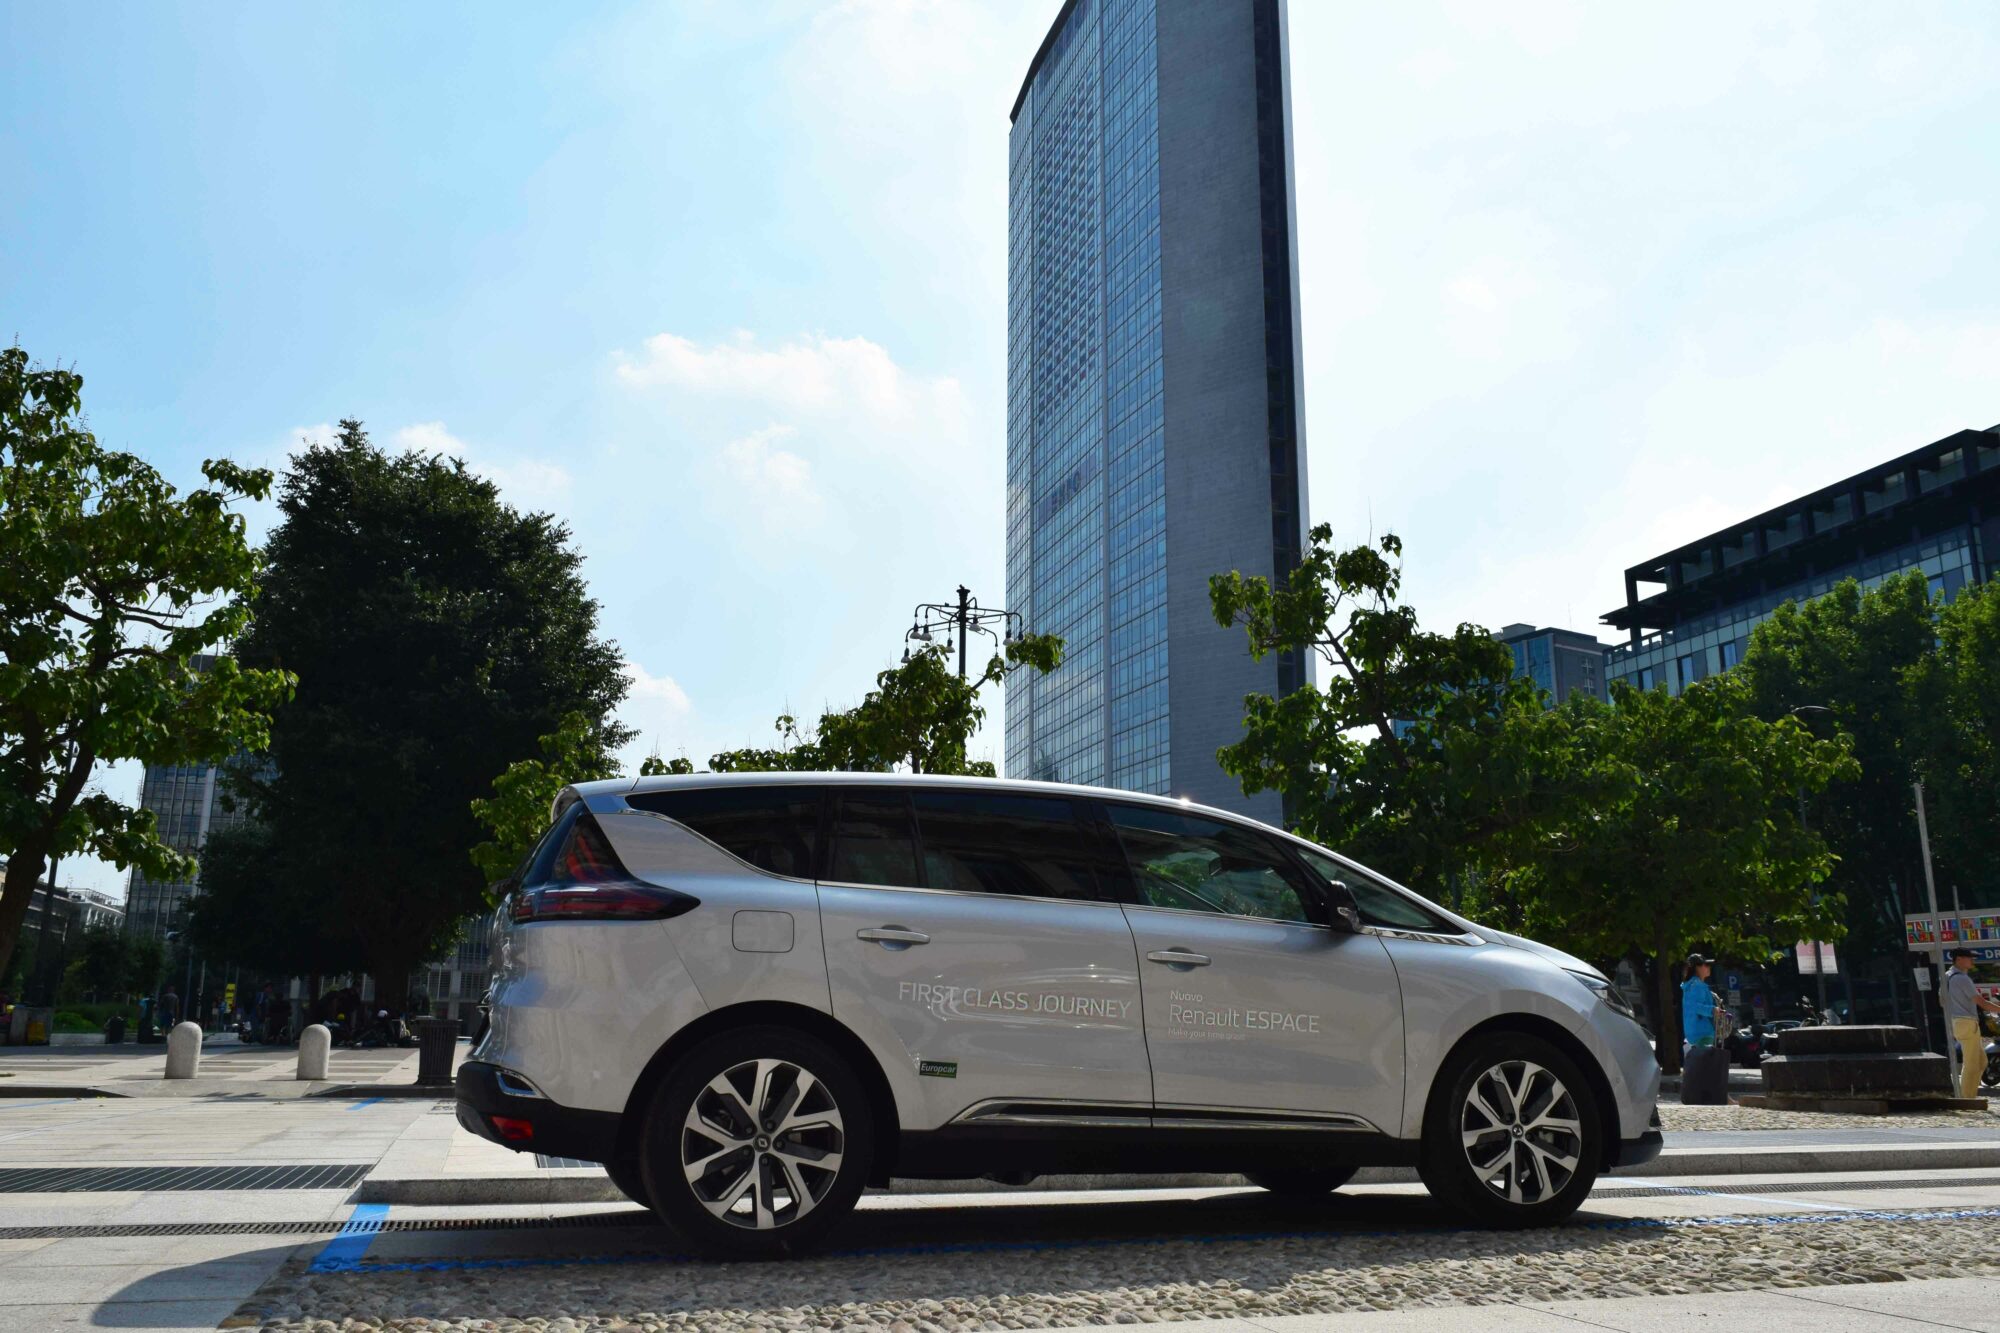 NUOVA RENAULT ESPACE FIRST CLASS JOURNEY MILANO